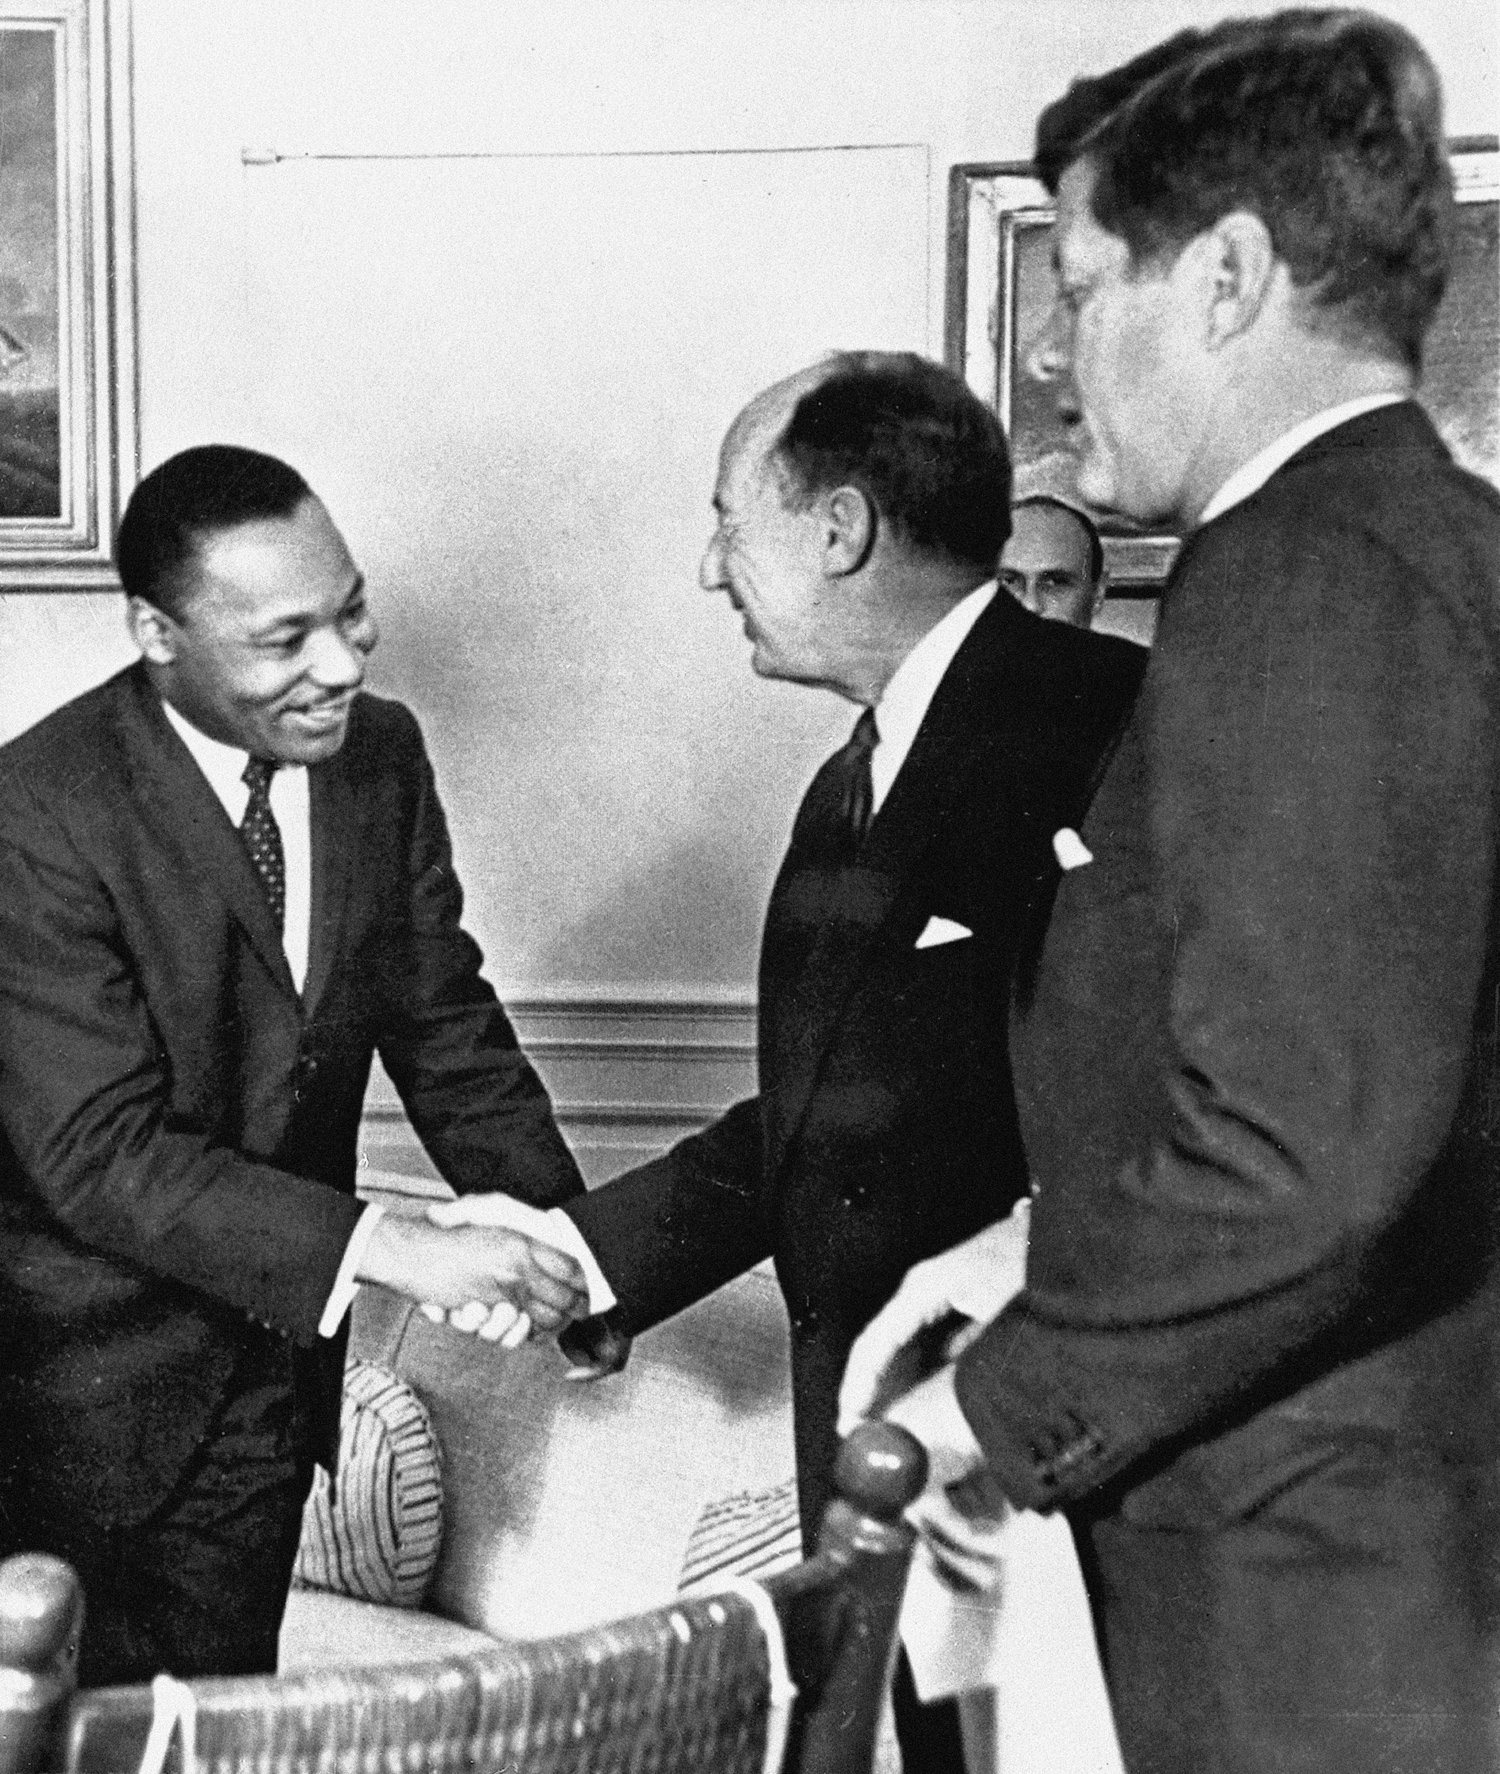 In this Dec. 17, 1962 file photo, Ambassador Adlai Stevenson, the U.S. delegate to the United Nations, shakes hands with Martin Luther King Jr., president of the Southern Christian Leadership Conference, Atlanta at the White House in Washington with President John F. Kennedy (right). Photo: AP